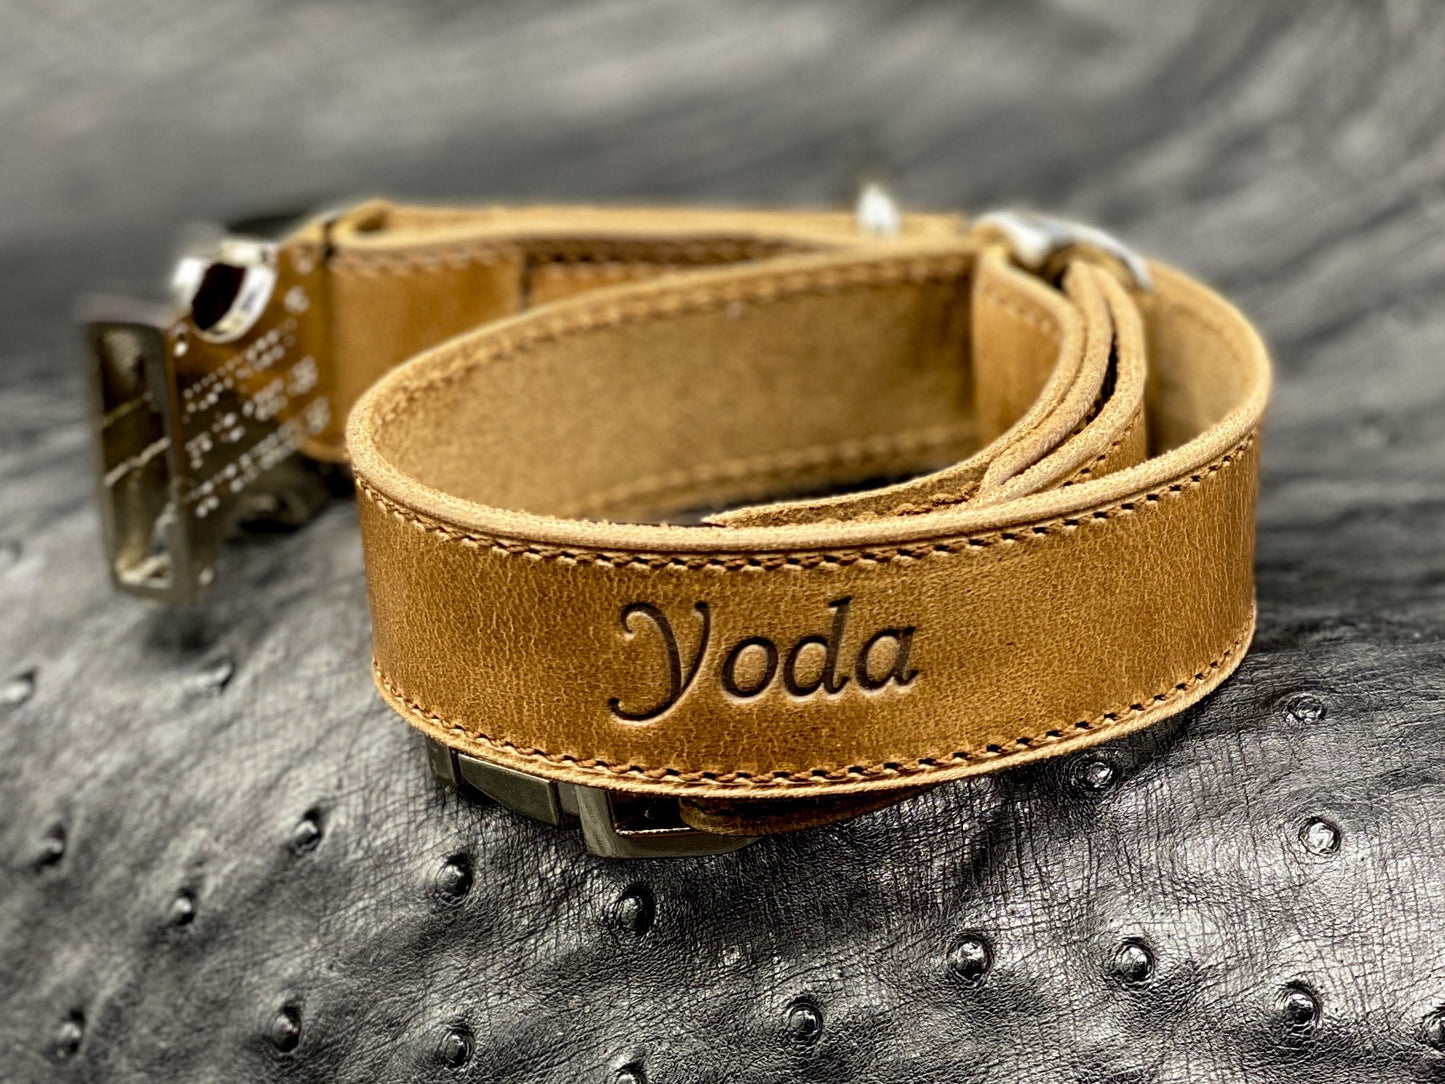 Handmade, Custom Dog Collars in Natural CXL Horween Leather | made in Houston, TX by Custom Leather and Pen